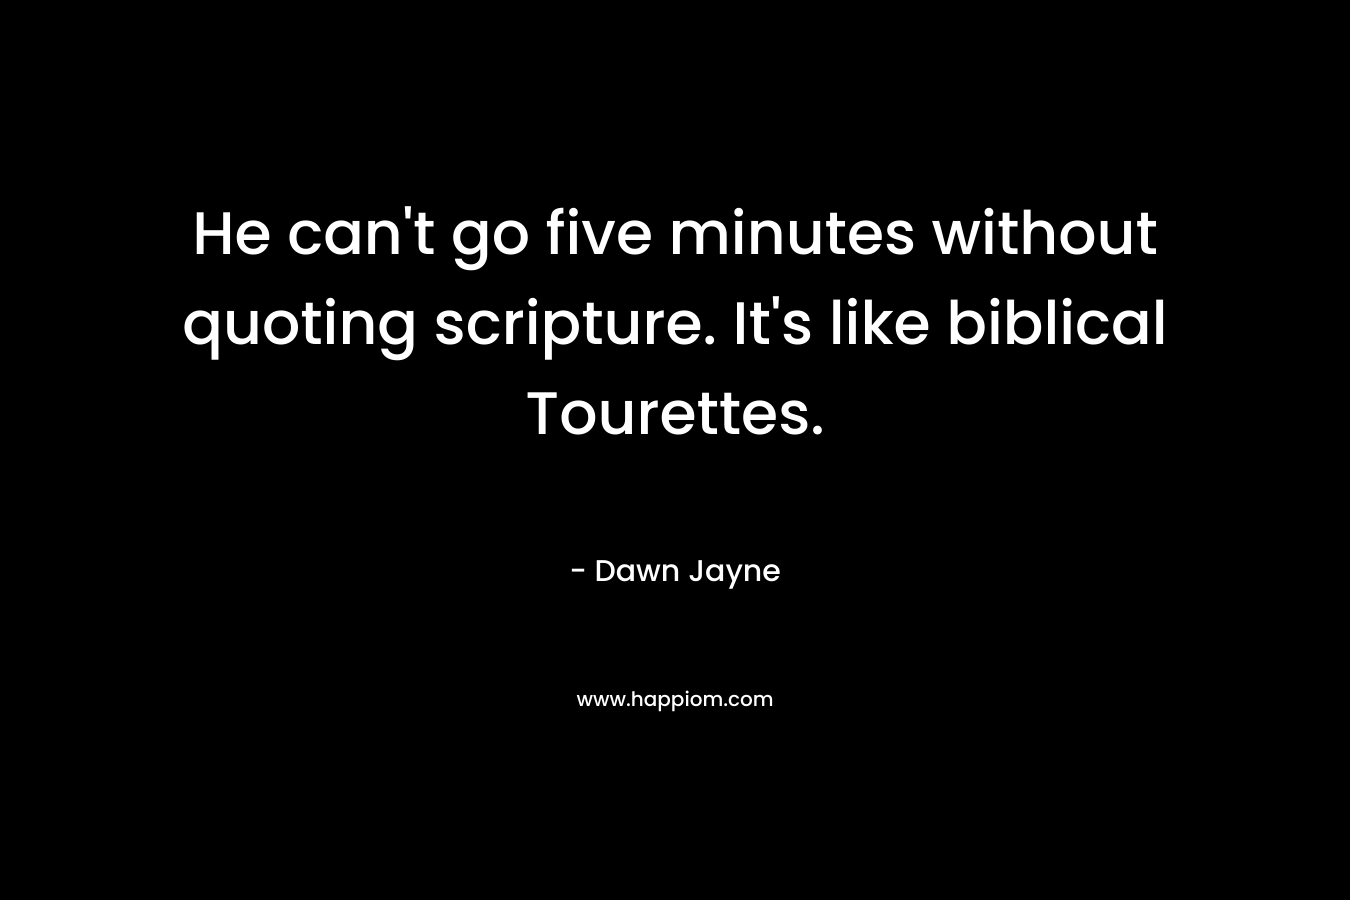 He can't go five minutes without quoting scripture. It's like biblical Tourettes.